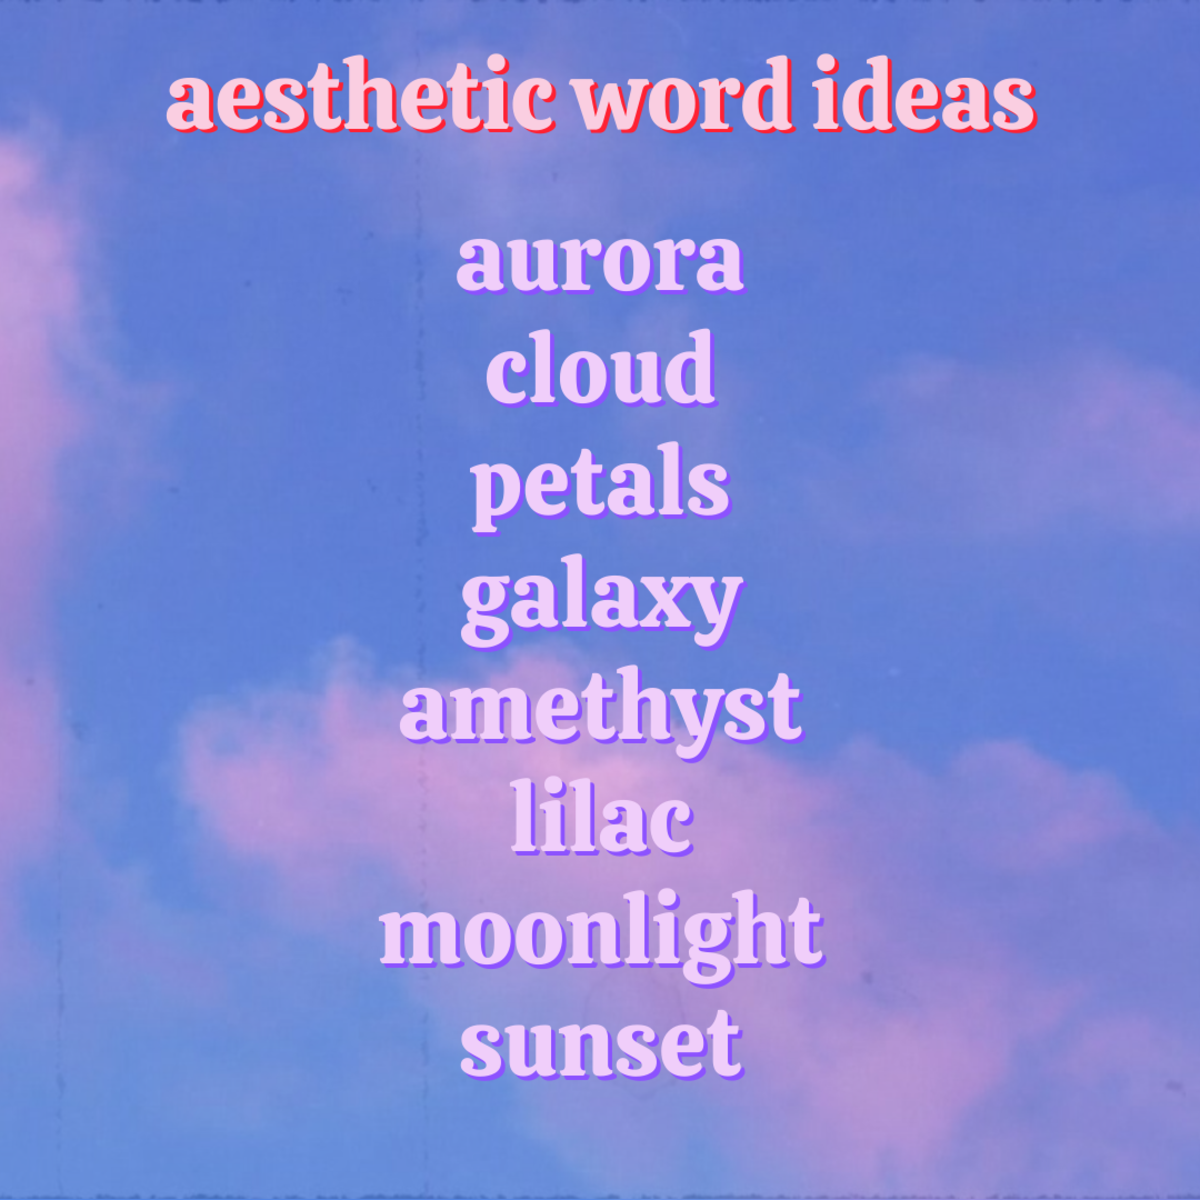 Here are some aesthetic word ideas to help inspire you!